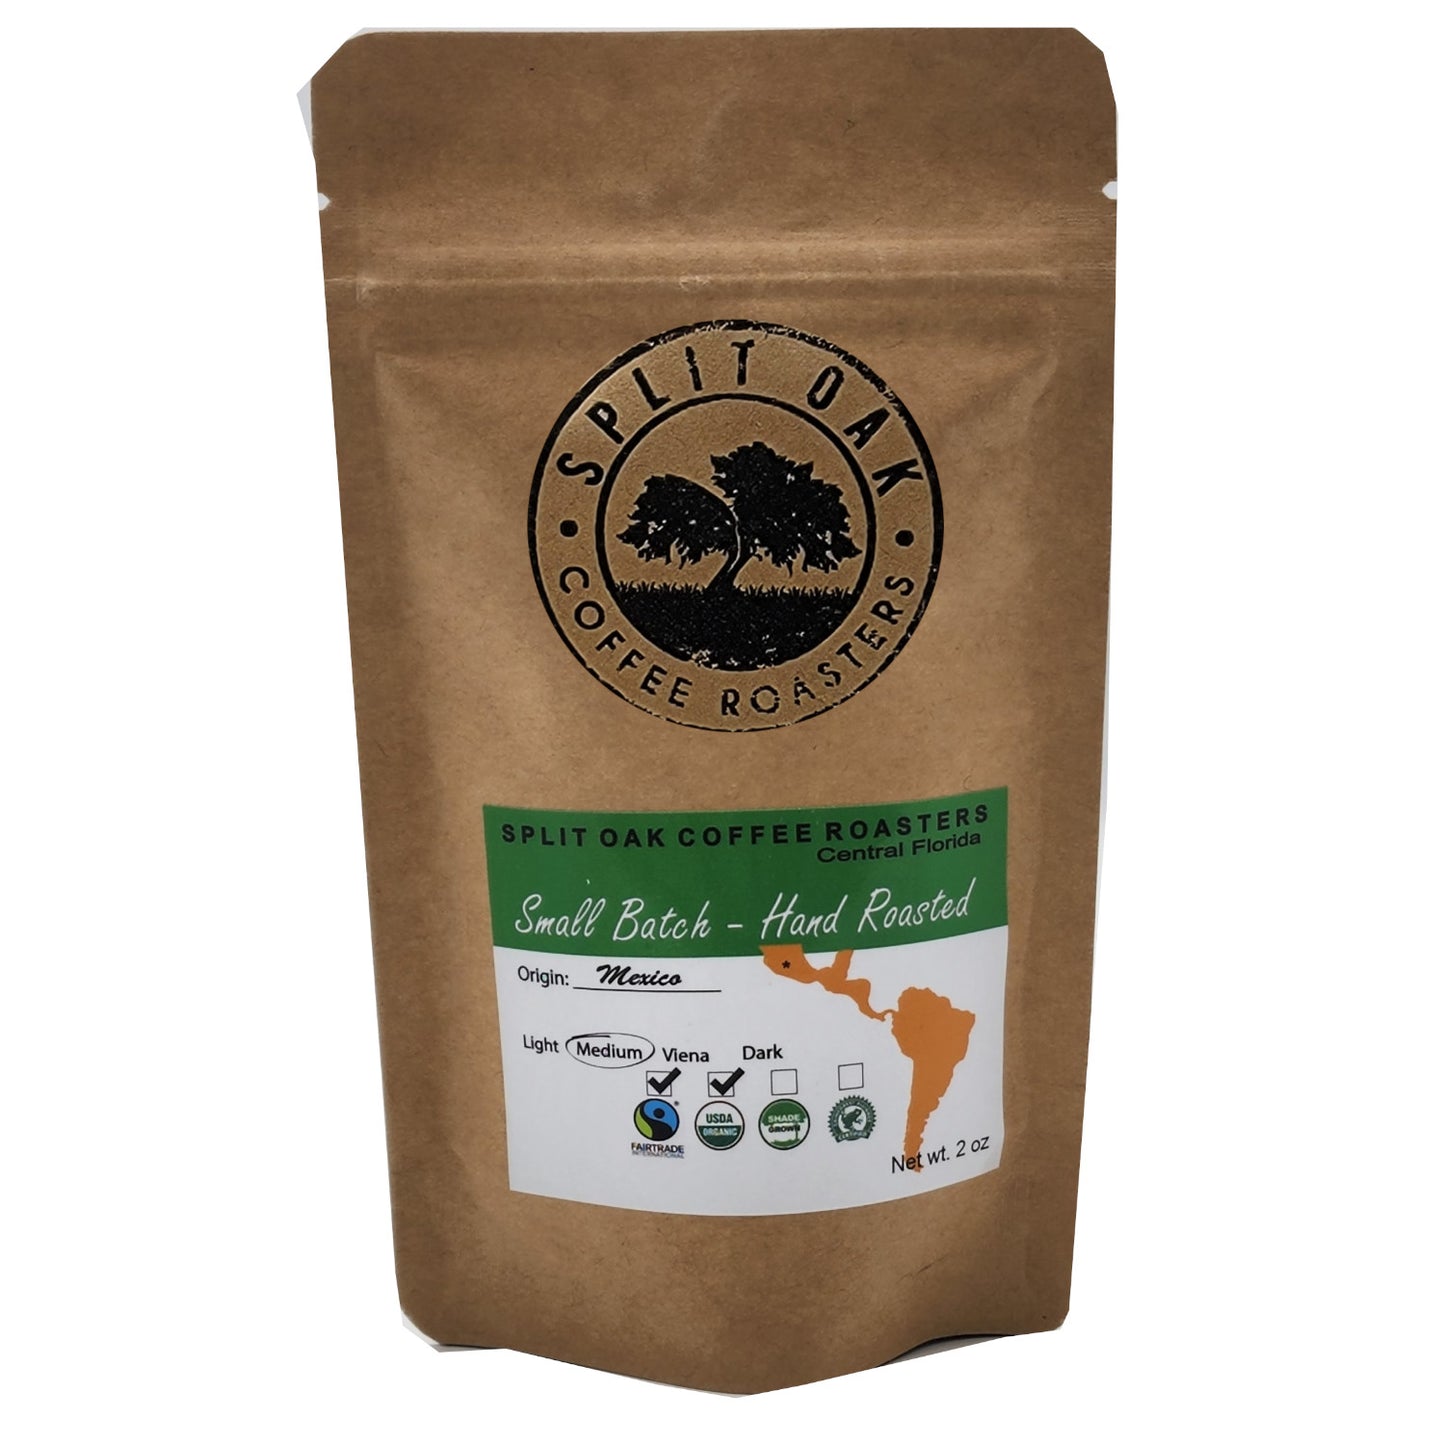 Coffee Samples 5 Pack Coffee Gift Set Las Americas. Gourmet Organic Medium Roast whole Bean Coffee with Best Beans From Mexico, Guatemala, Peru, Colombia and Brazil